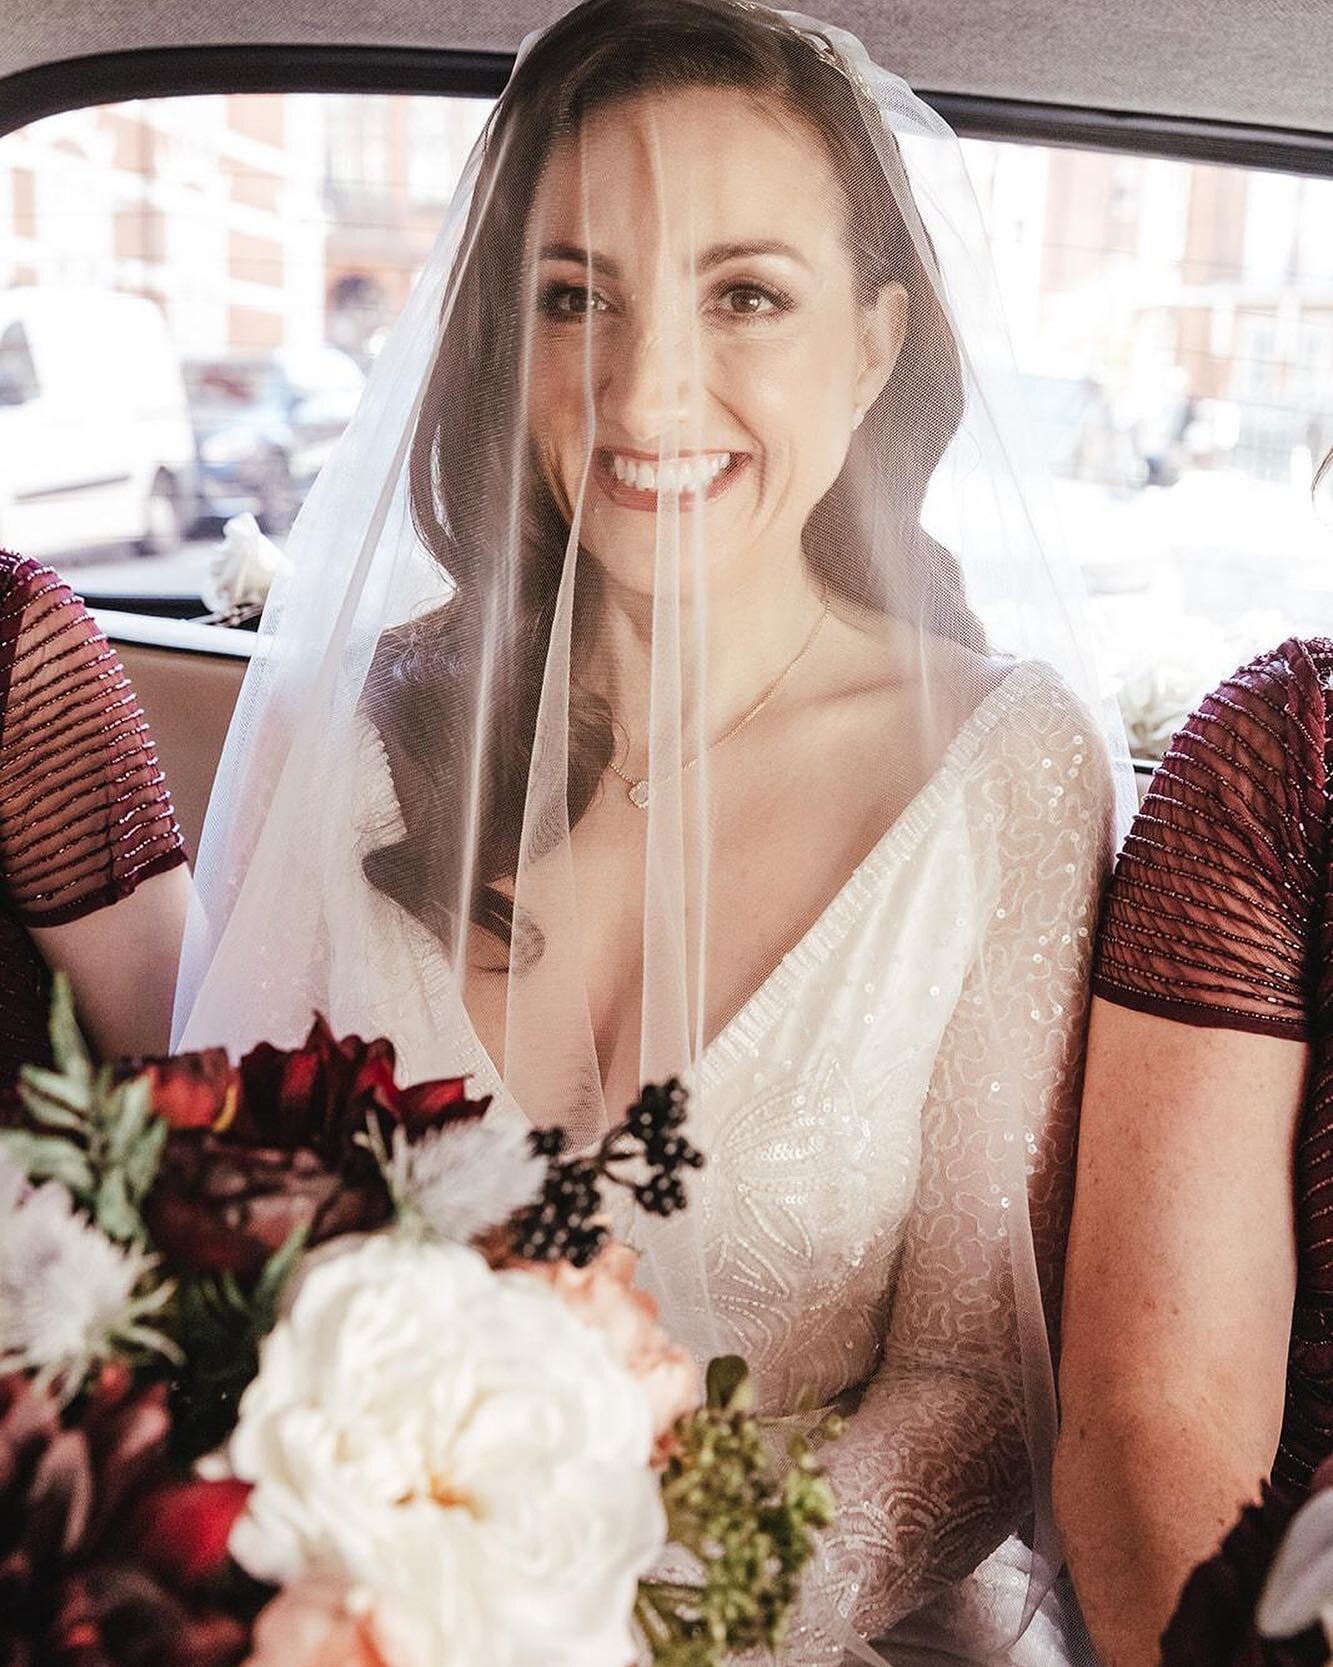 Bridal perfection, if we say so ourselves!💕

Love this shot of our beautiful dream team bride, Lara, as she heads off to go meet her beau, Nathan, and start her new chapter with him @marrymeinchelsea The smile says it all! X

Vintage waves to match 